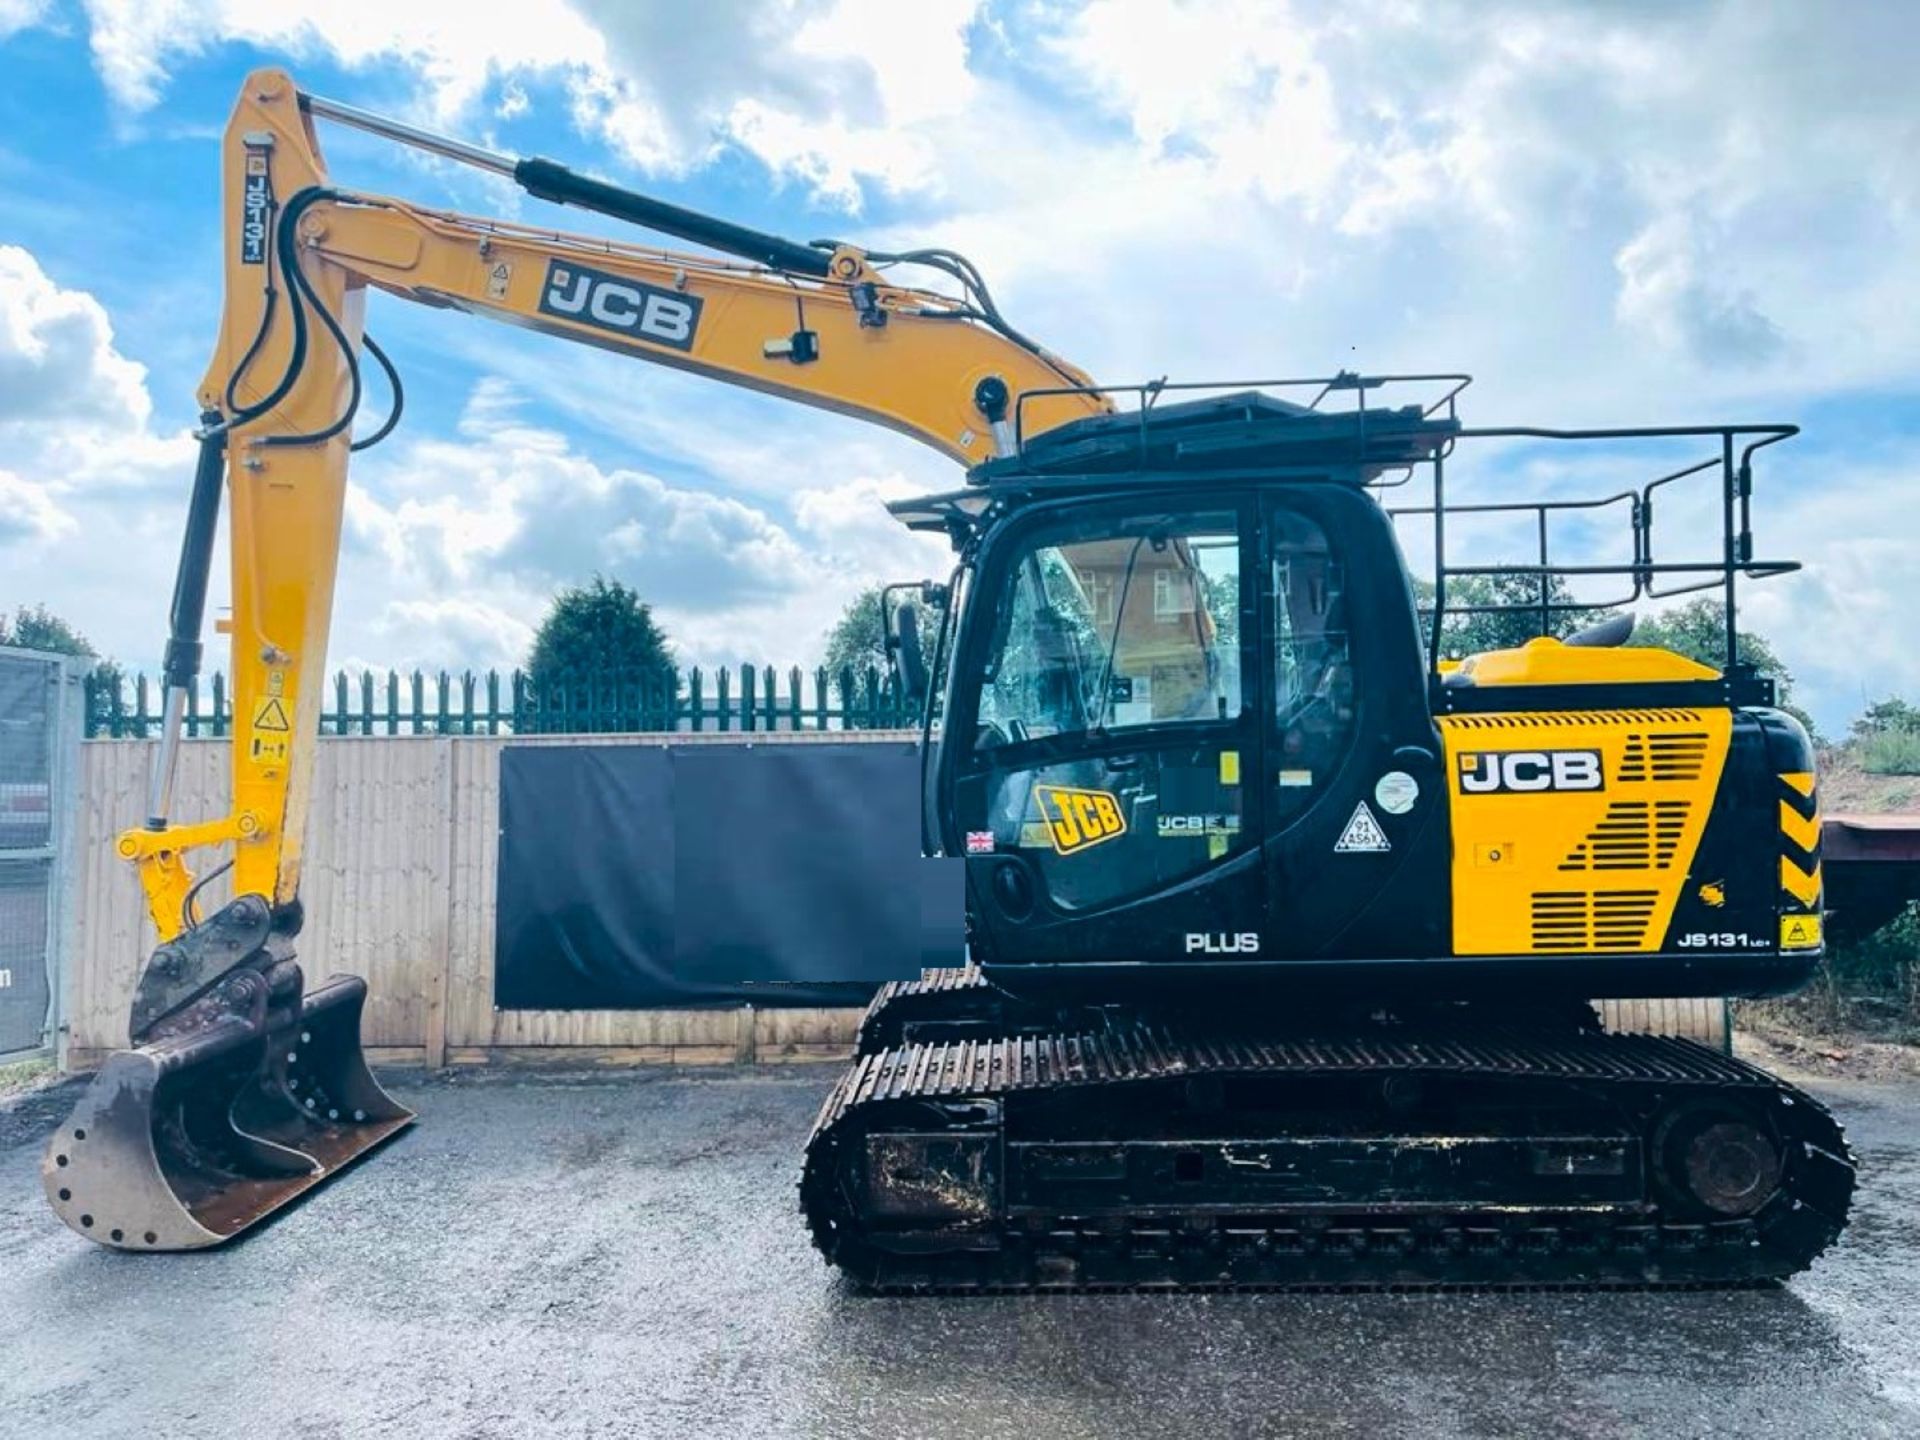 JCB JS131 LC PLUS 2018 3464 HOURS CODED START AIR CON